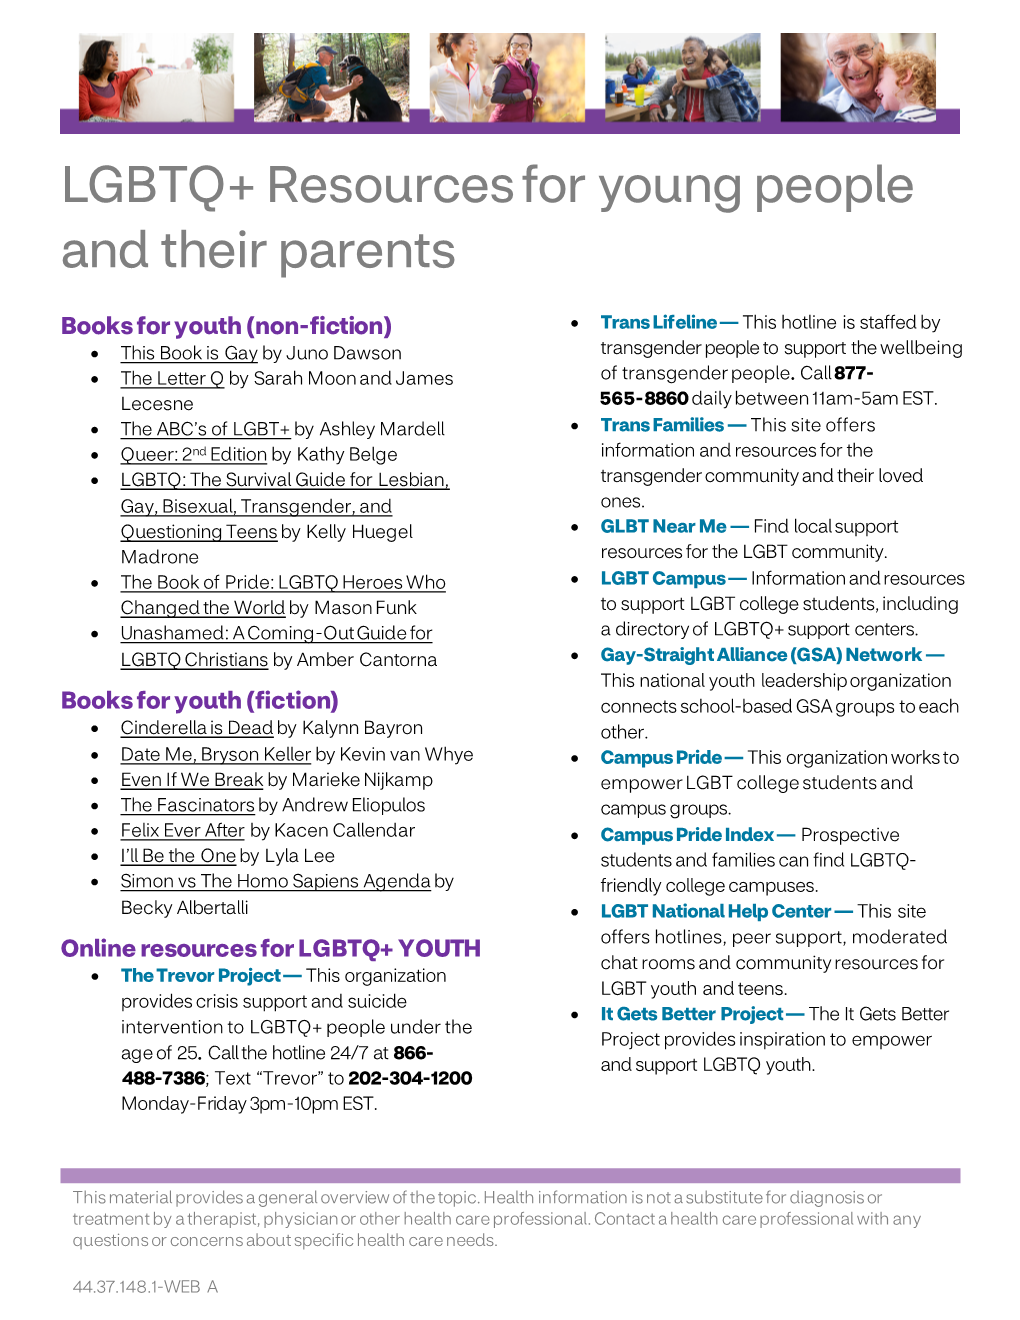 LGBTQ+ Resources for Young People and Their Parents